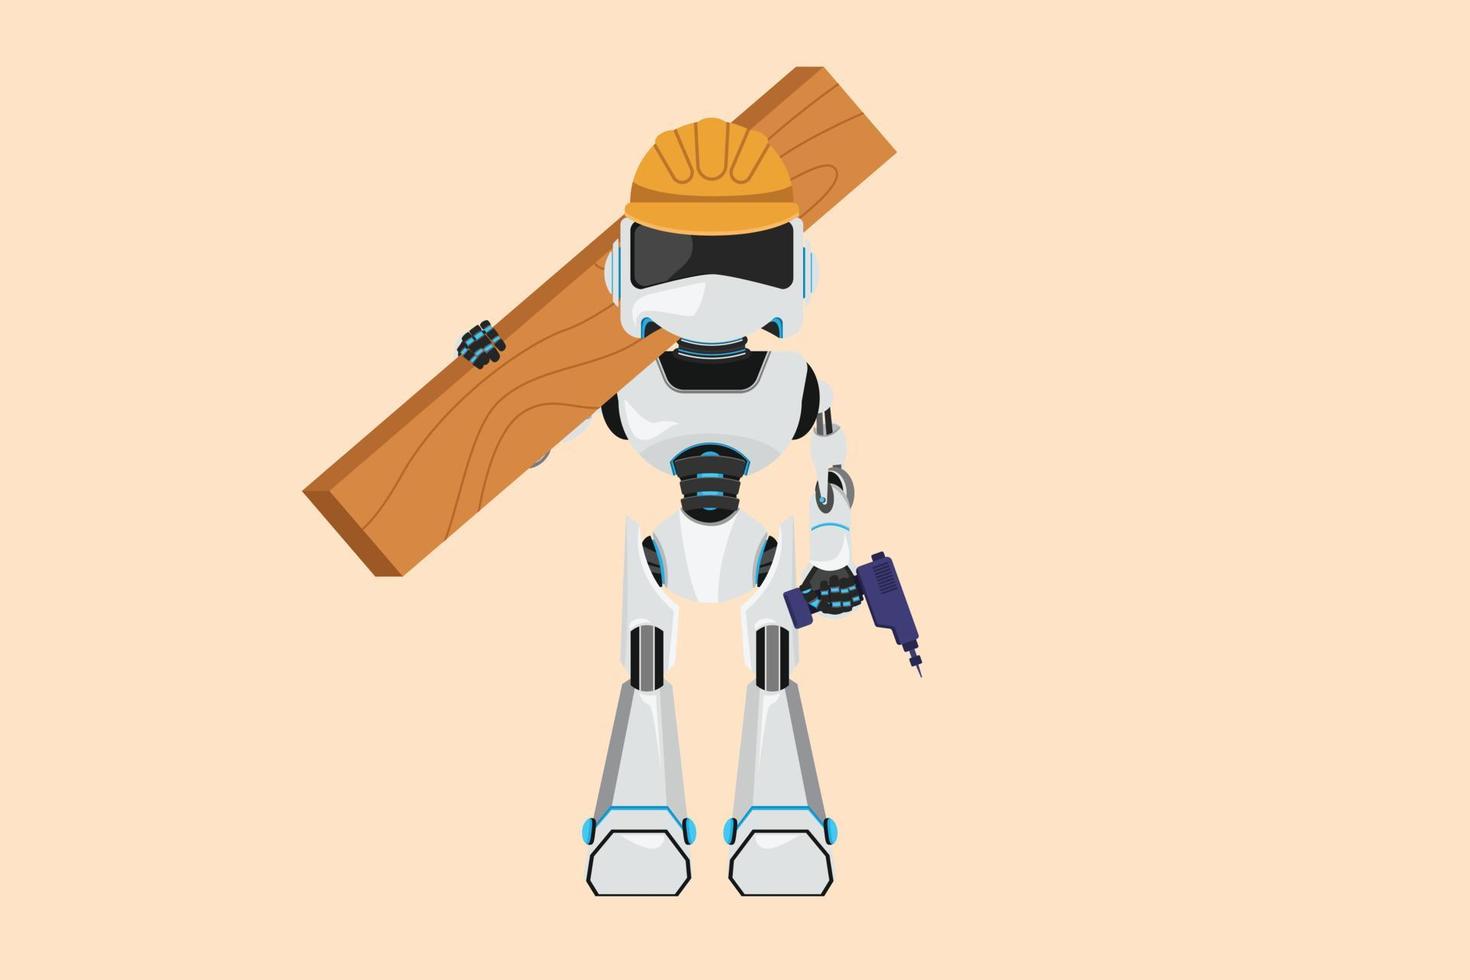 Business design drawing robot timber frame house construction worker. Repairman standing with board, tool box, and drill. Future technology. Artificial intelligence. Flat cartoon vector illustration